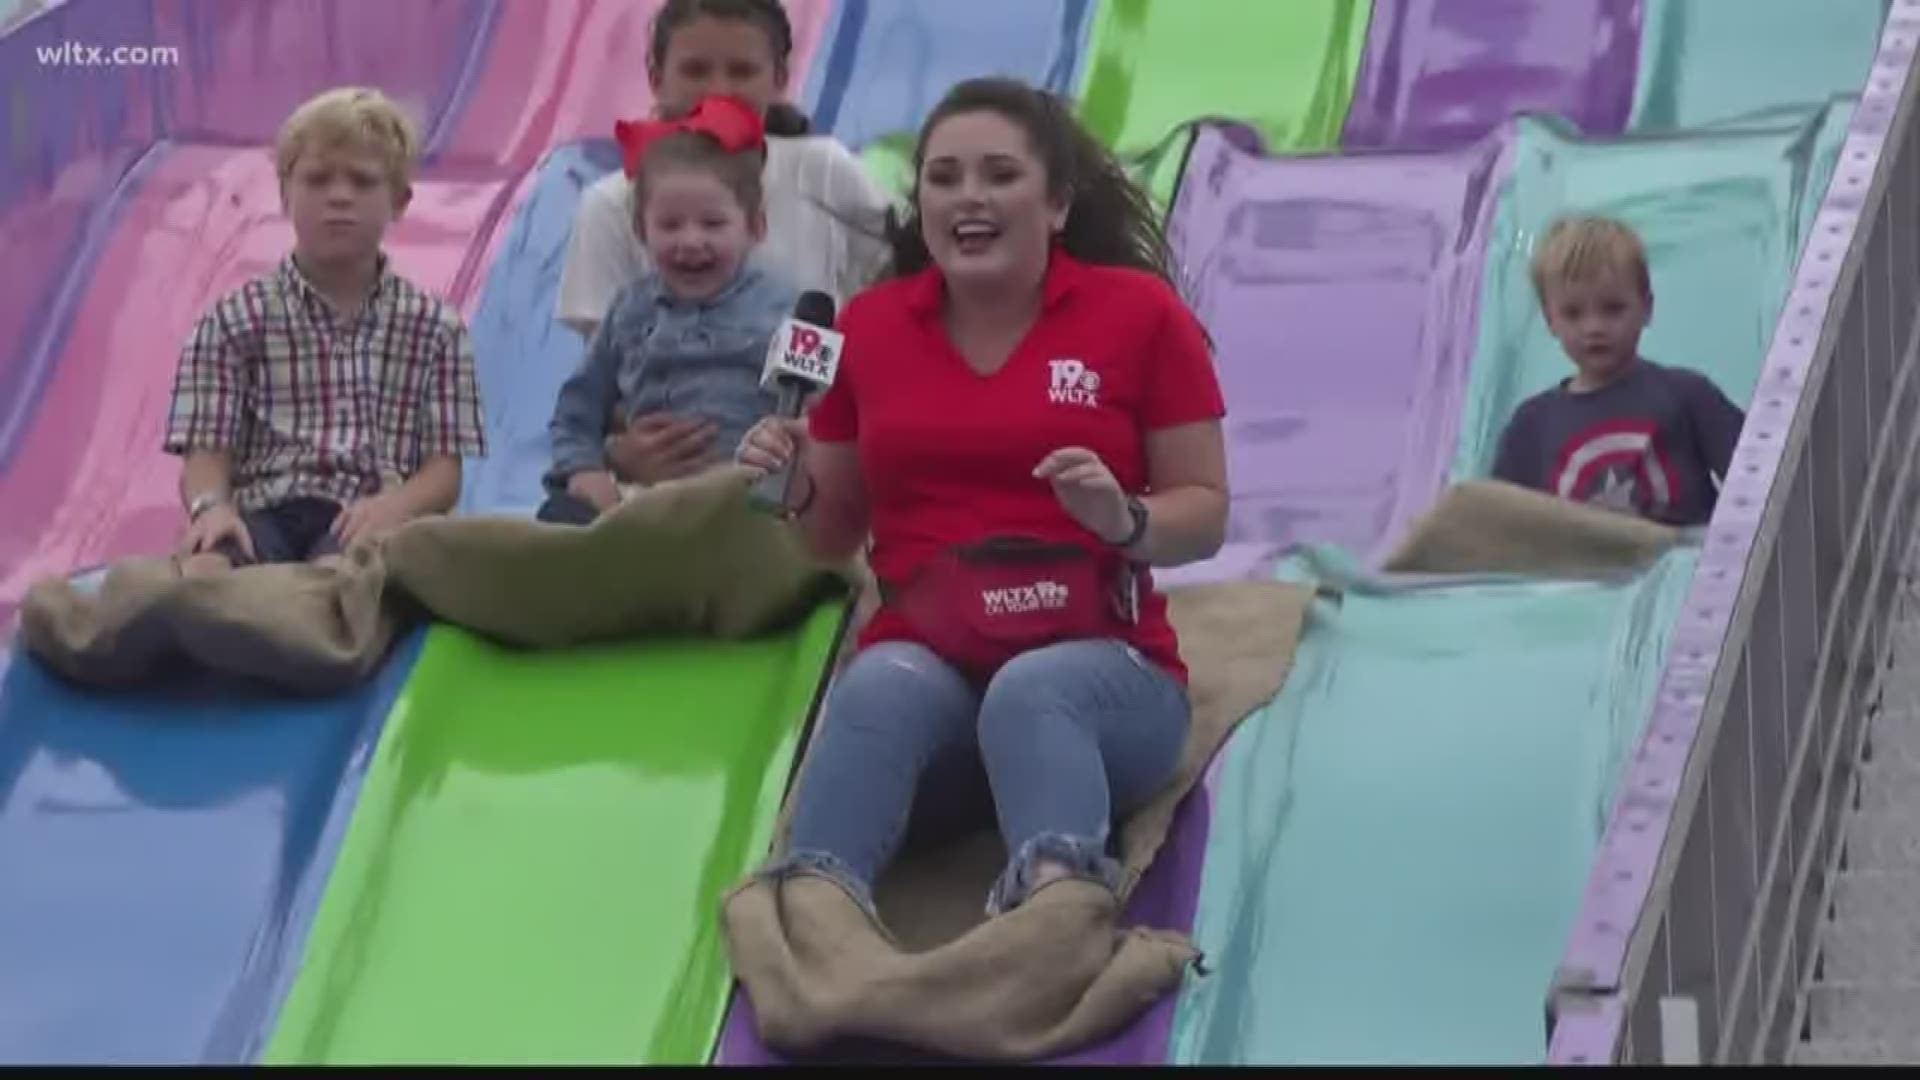 Emily Correll got into a fun slide race with a few kids at the South Carolina State Fair.